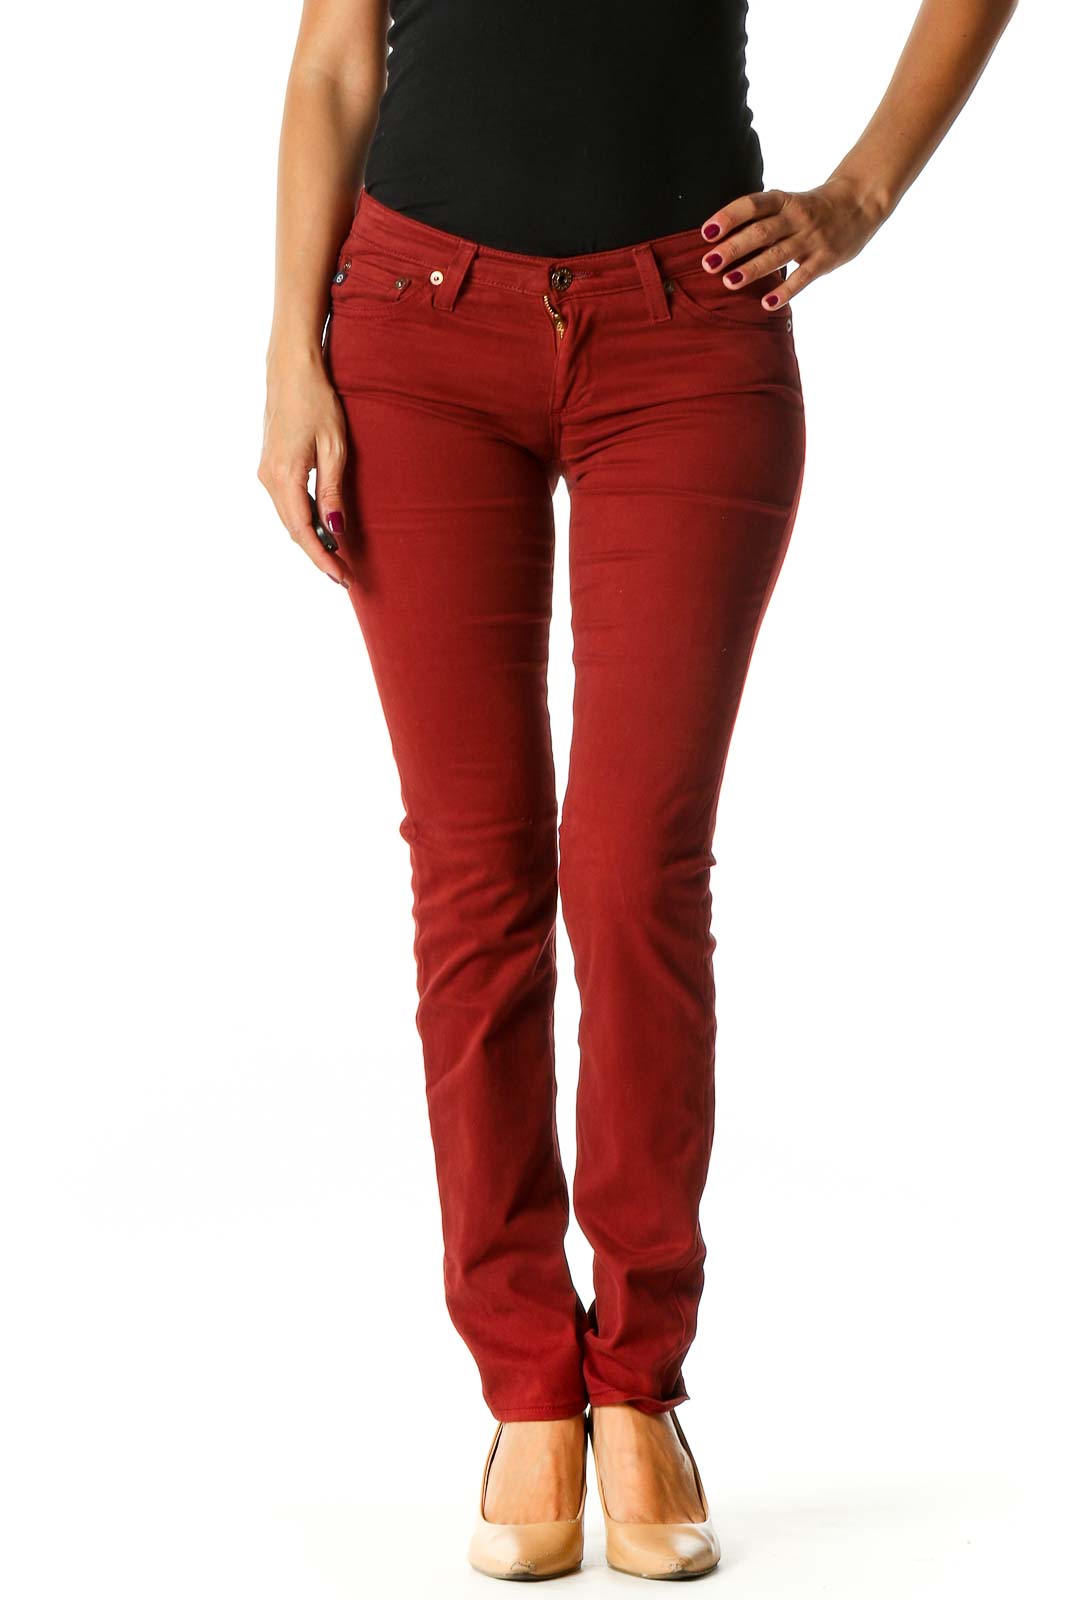 Red Casual Skinny Jeans Front